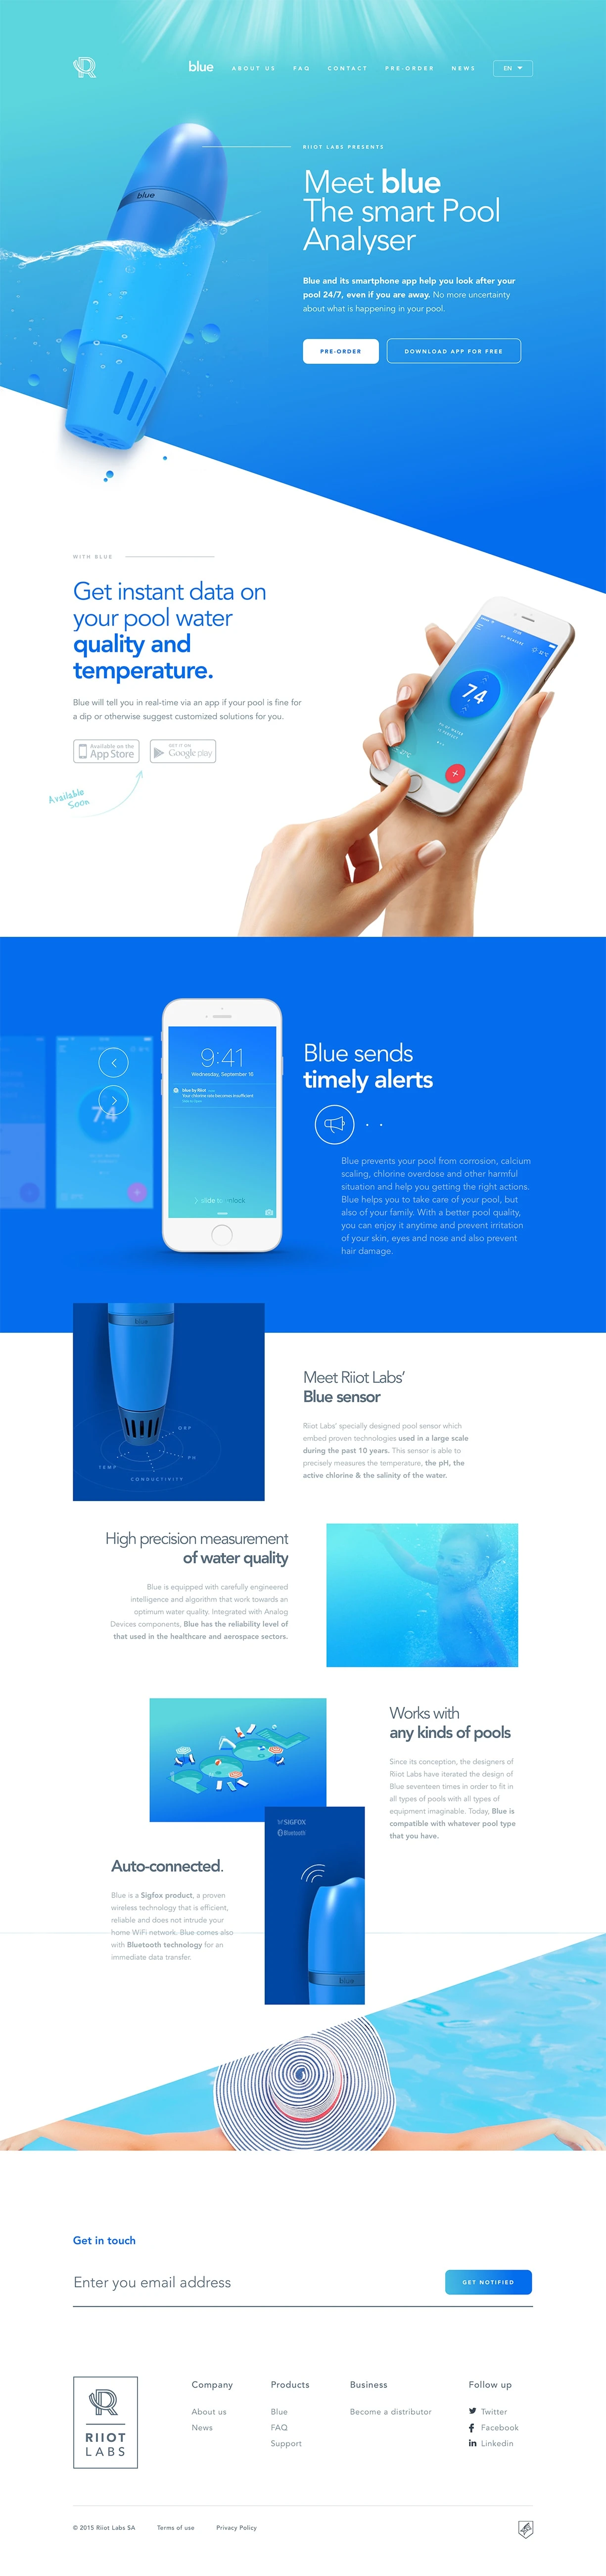 Riiot Labs Landing Page Example: Get instant data on your pool water quality and temperature. Blue will tell you in real-time via an app if your pool is fine for a dip or otherwise suggest customized solutions for you.